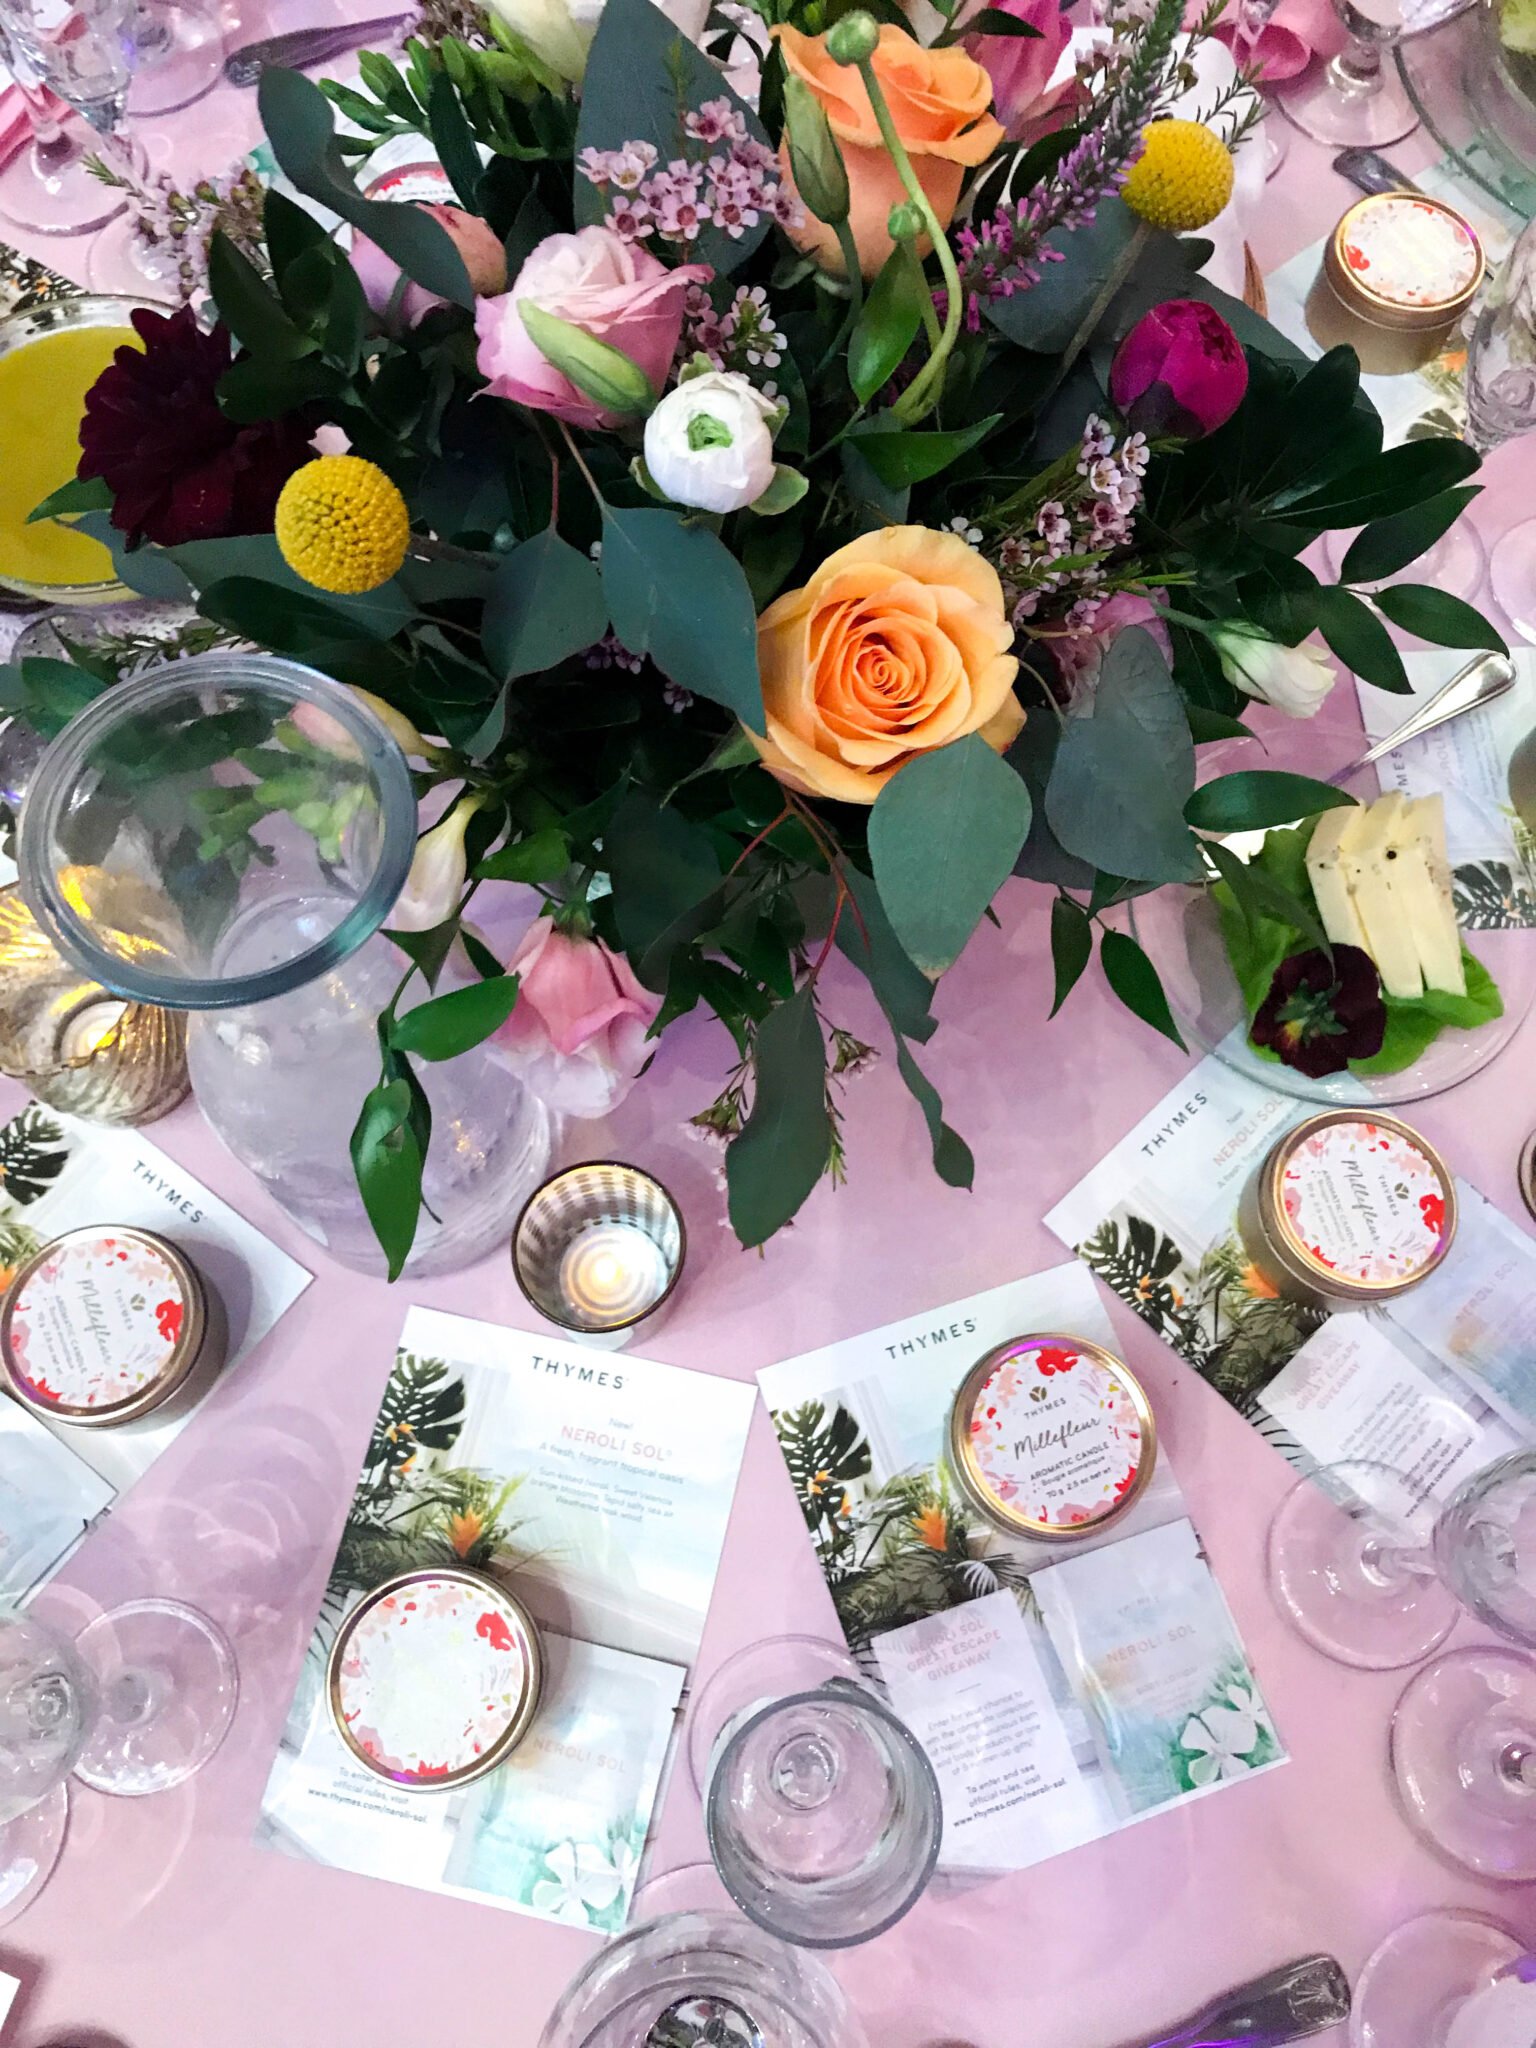 Tablescape at MIA's Art in Bloom in 2018